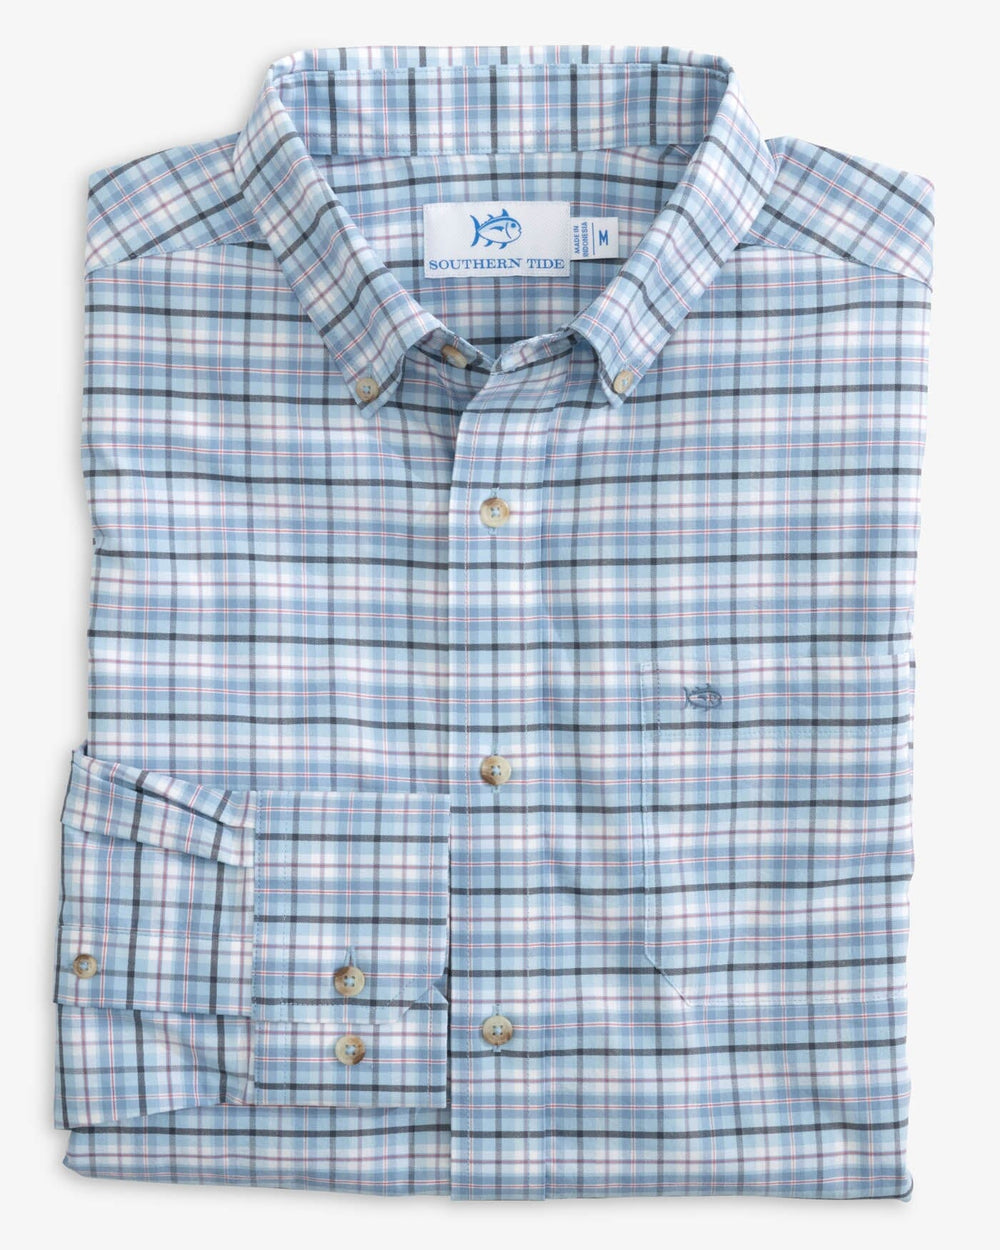 The folded view of the Southern Tide Coastal Passage Patton Plaid Sport Shirts by Southern Tide - Dream Blue